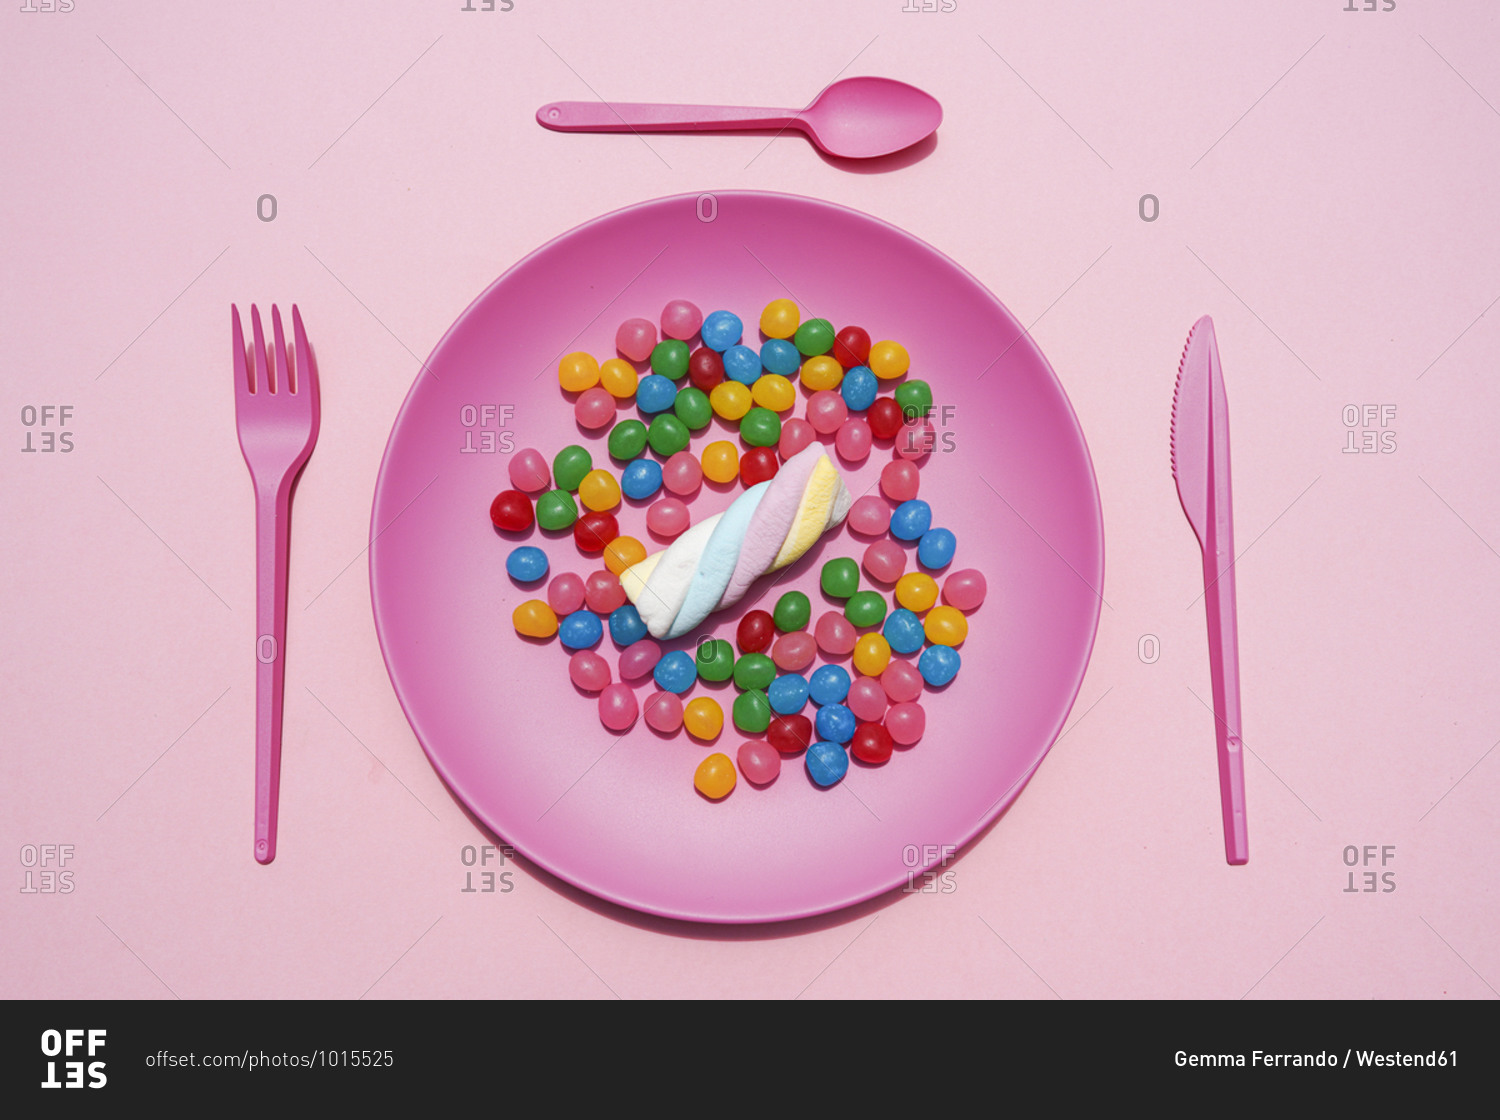 Studio shot of plastic plate full of candies and single marshmallow